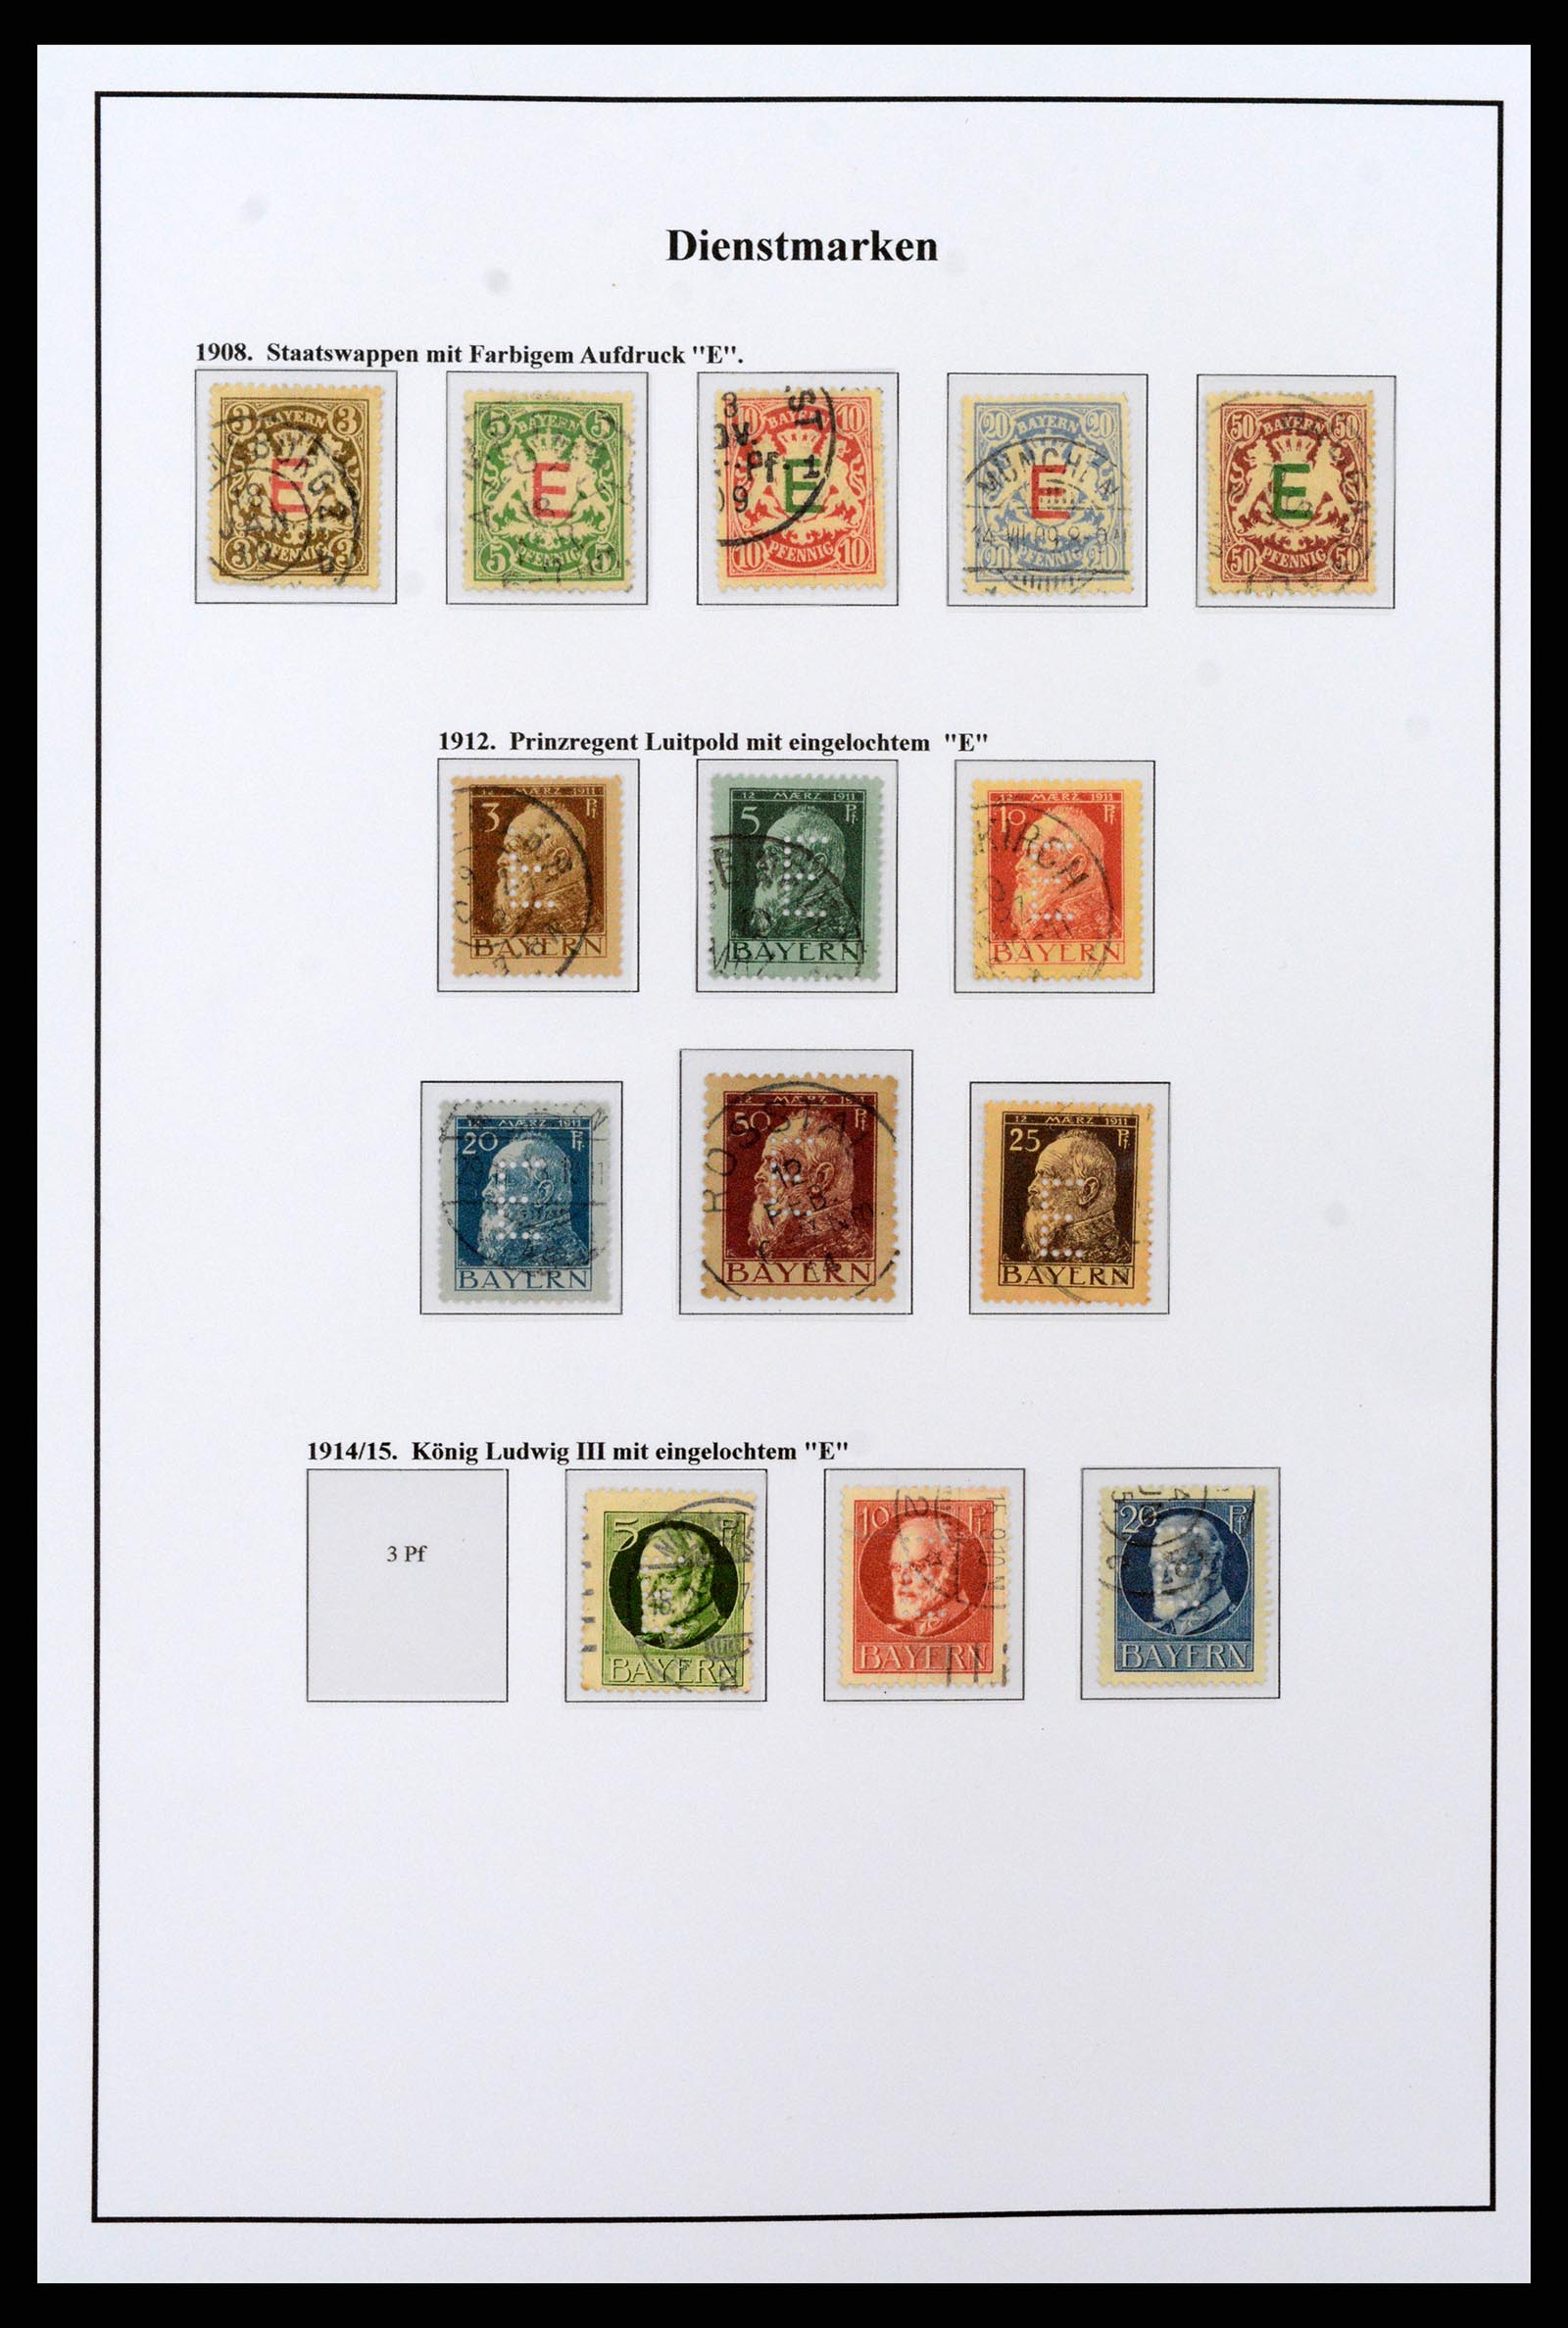 37235 020 - Stamp collection 37235 Germany 1872-1990.